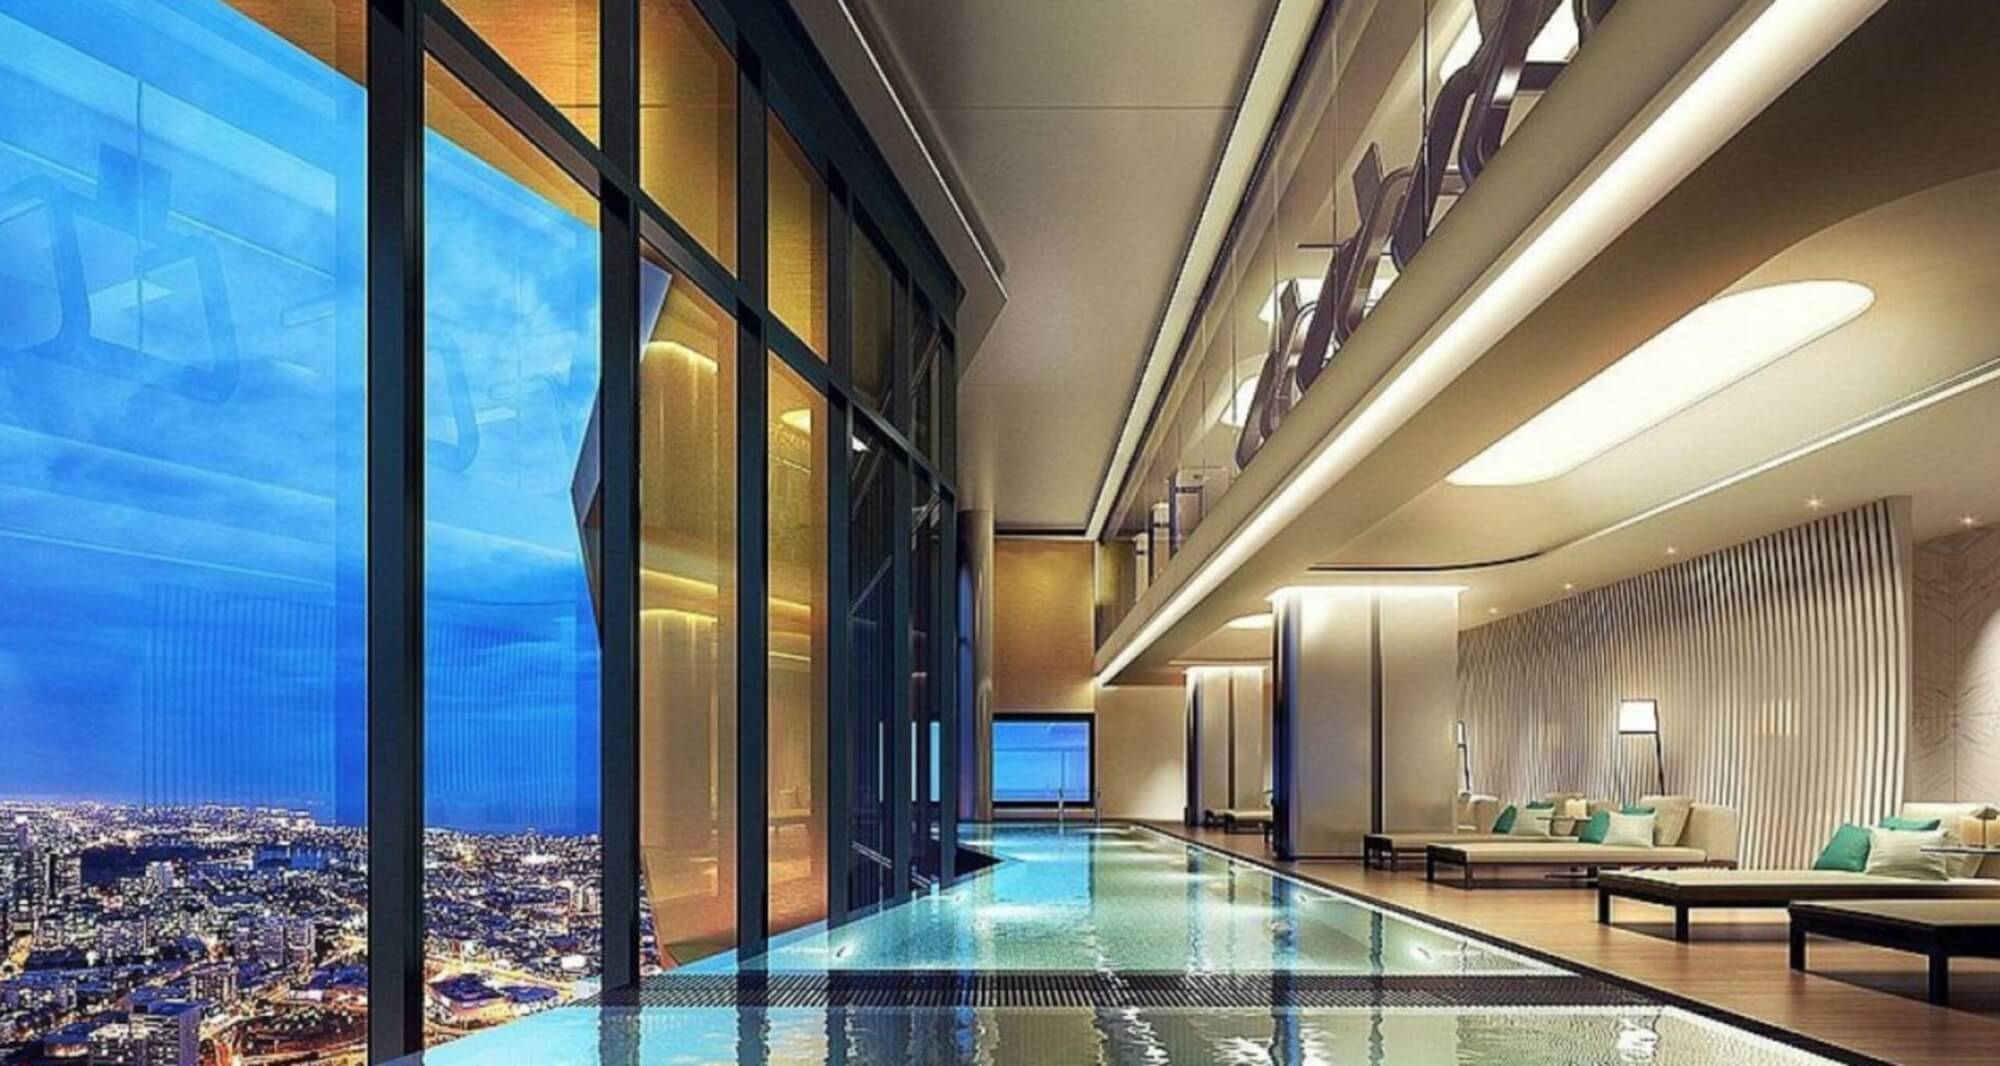 What the $25 Million Penthouse Means for Melbourne